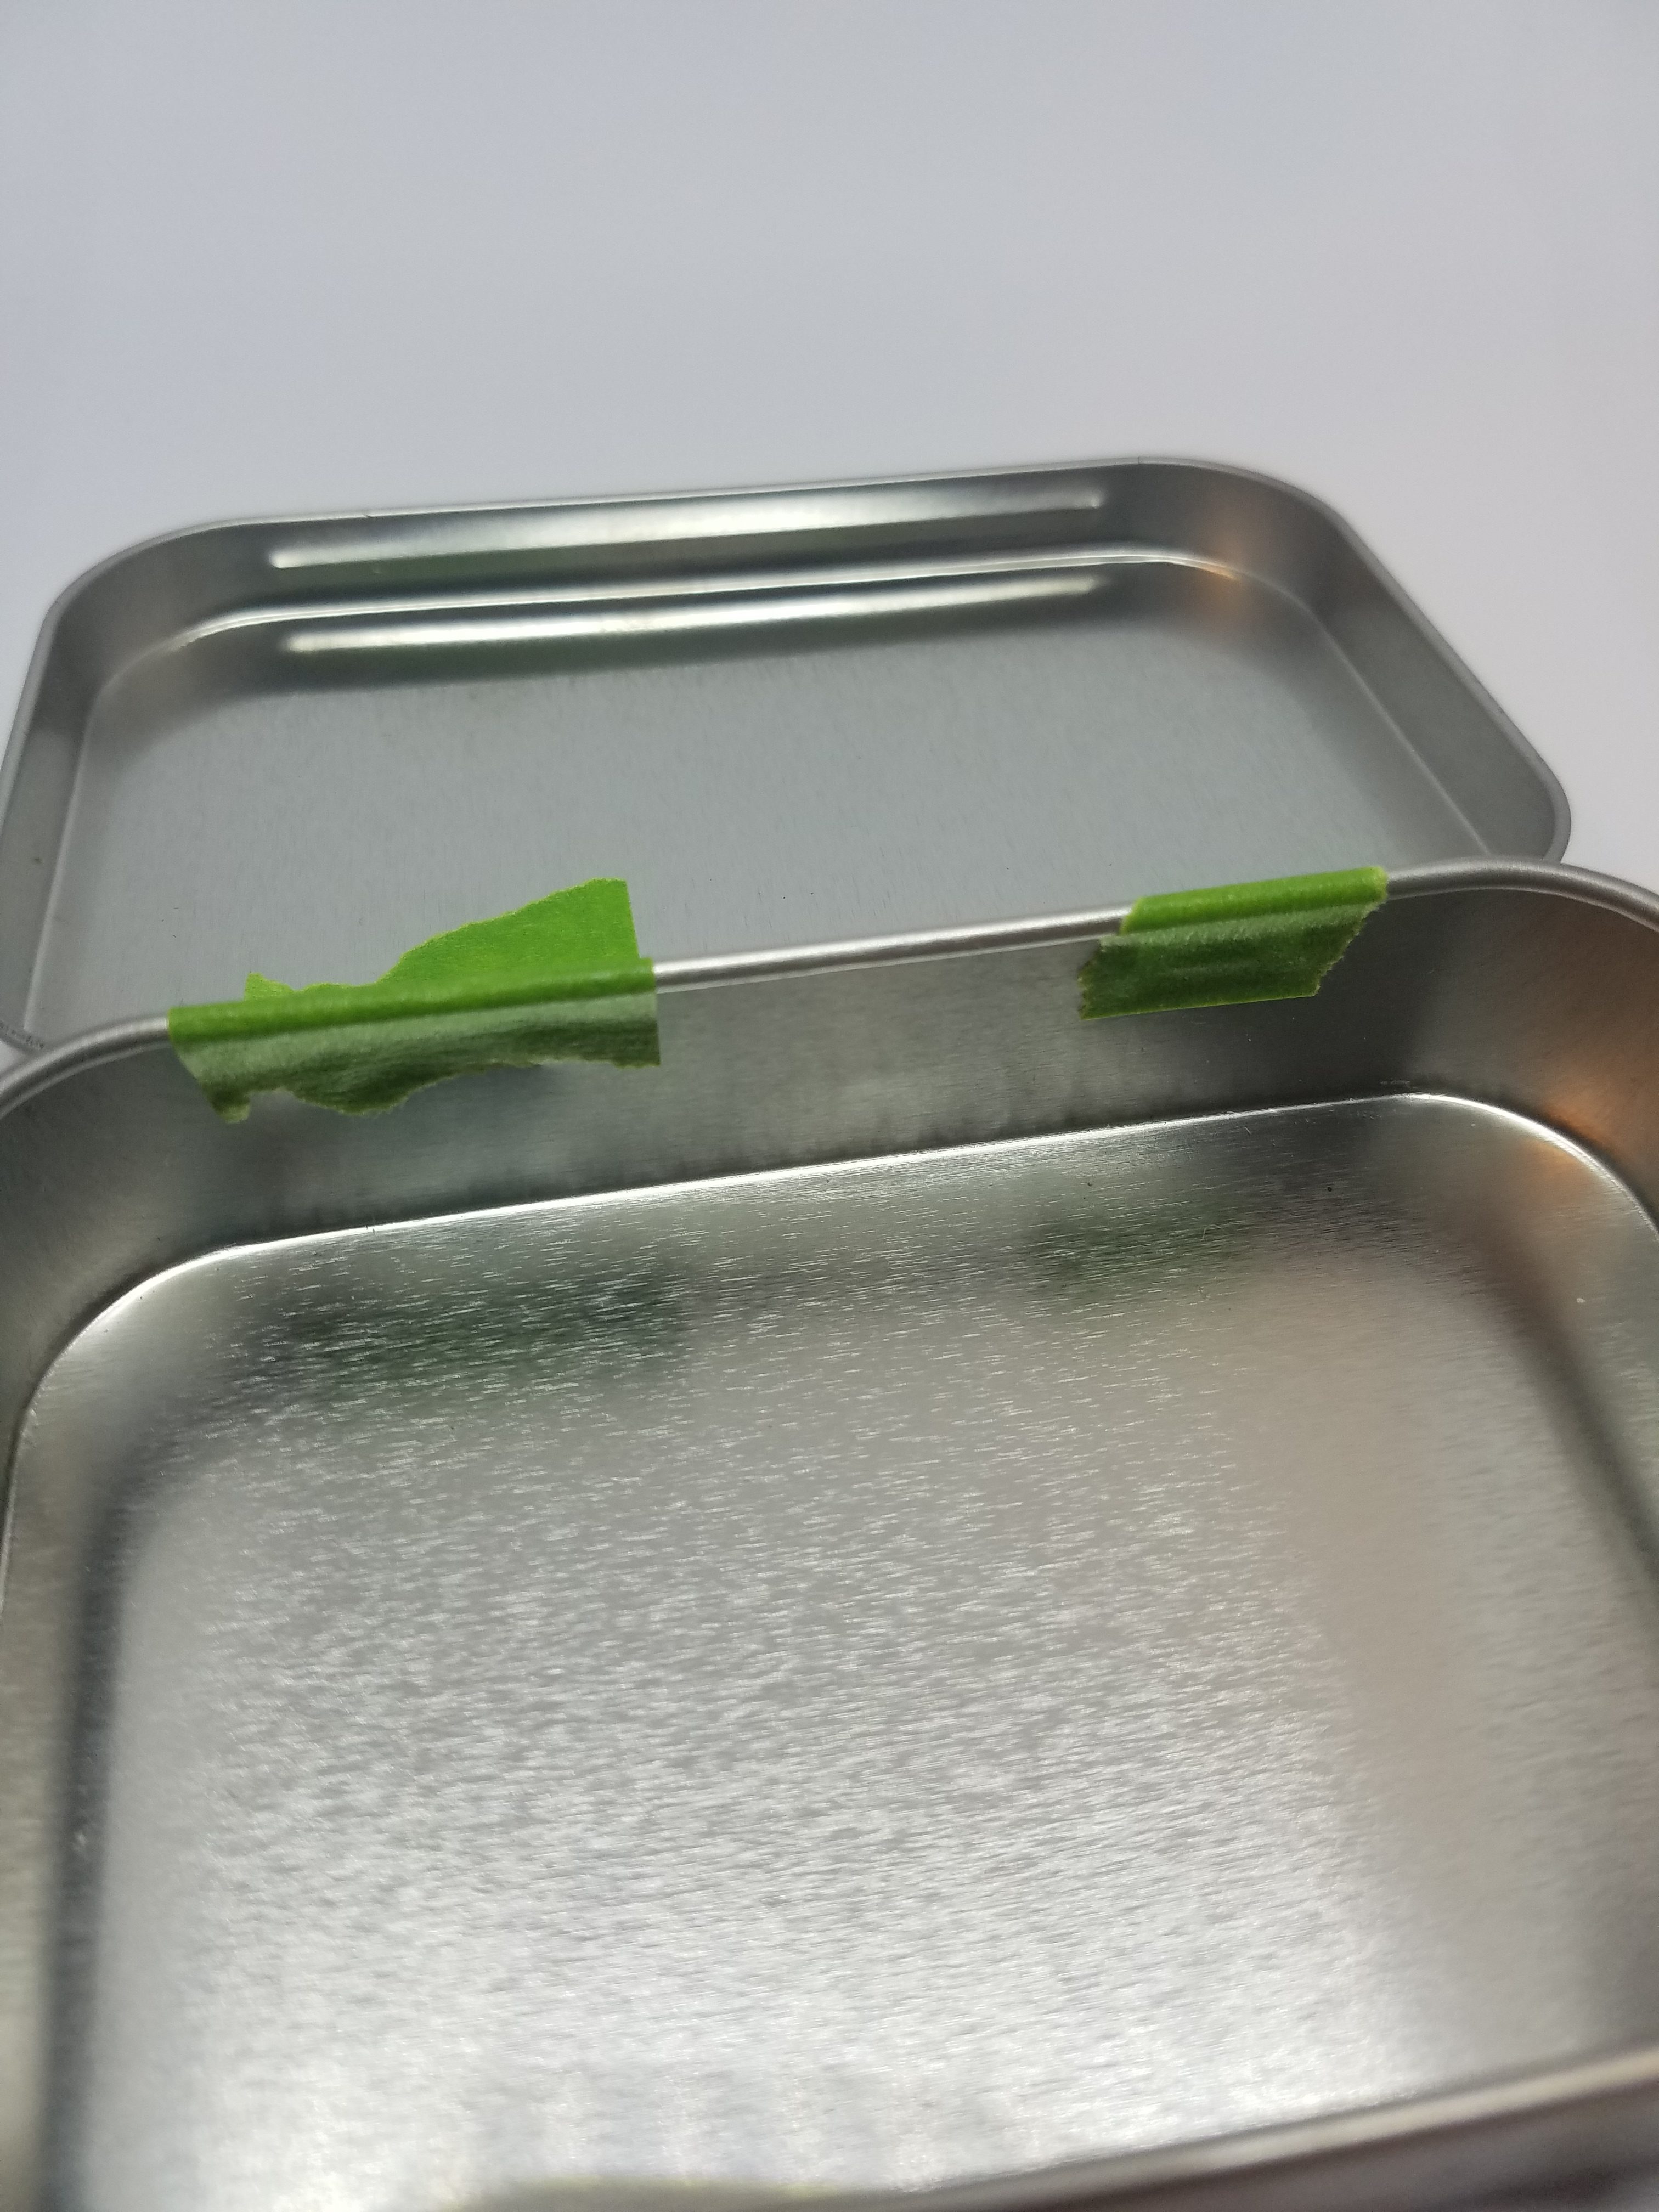 green tape on the hinges of the empty mint tin